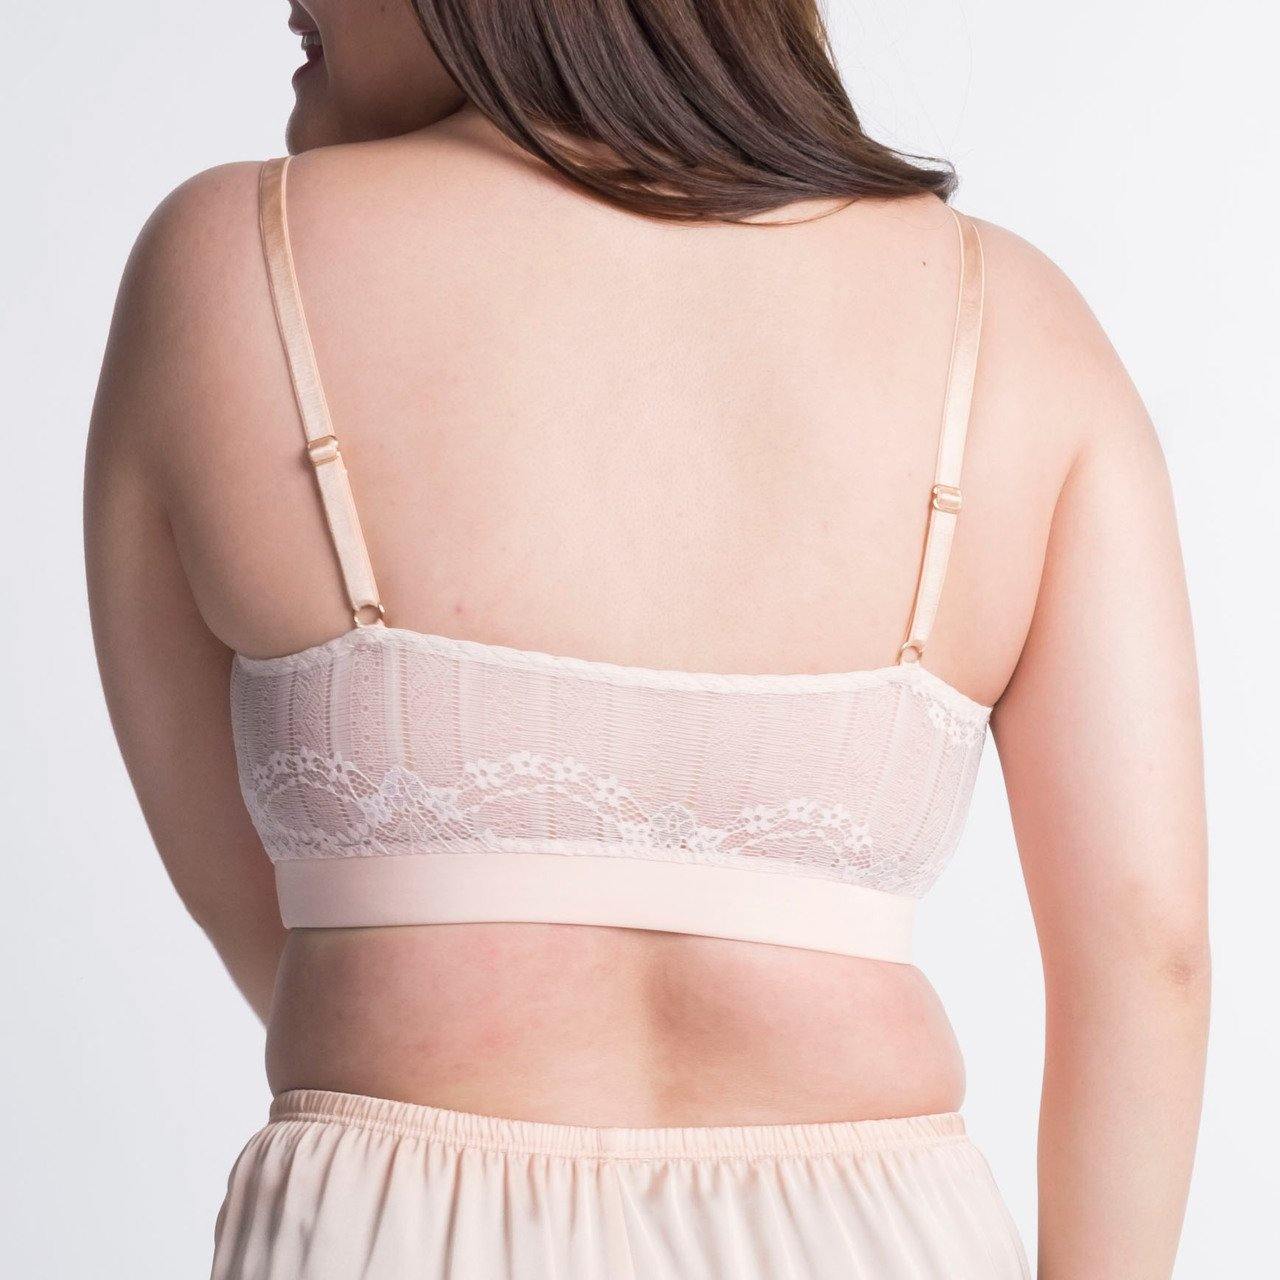 the baby bralette - Our Bralette Club